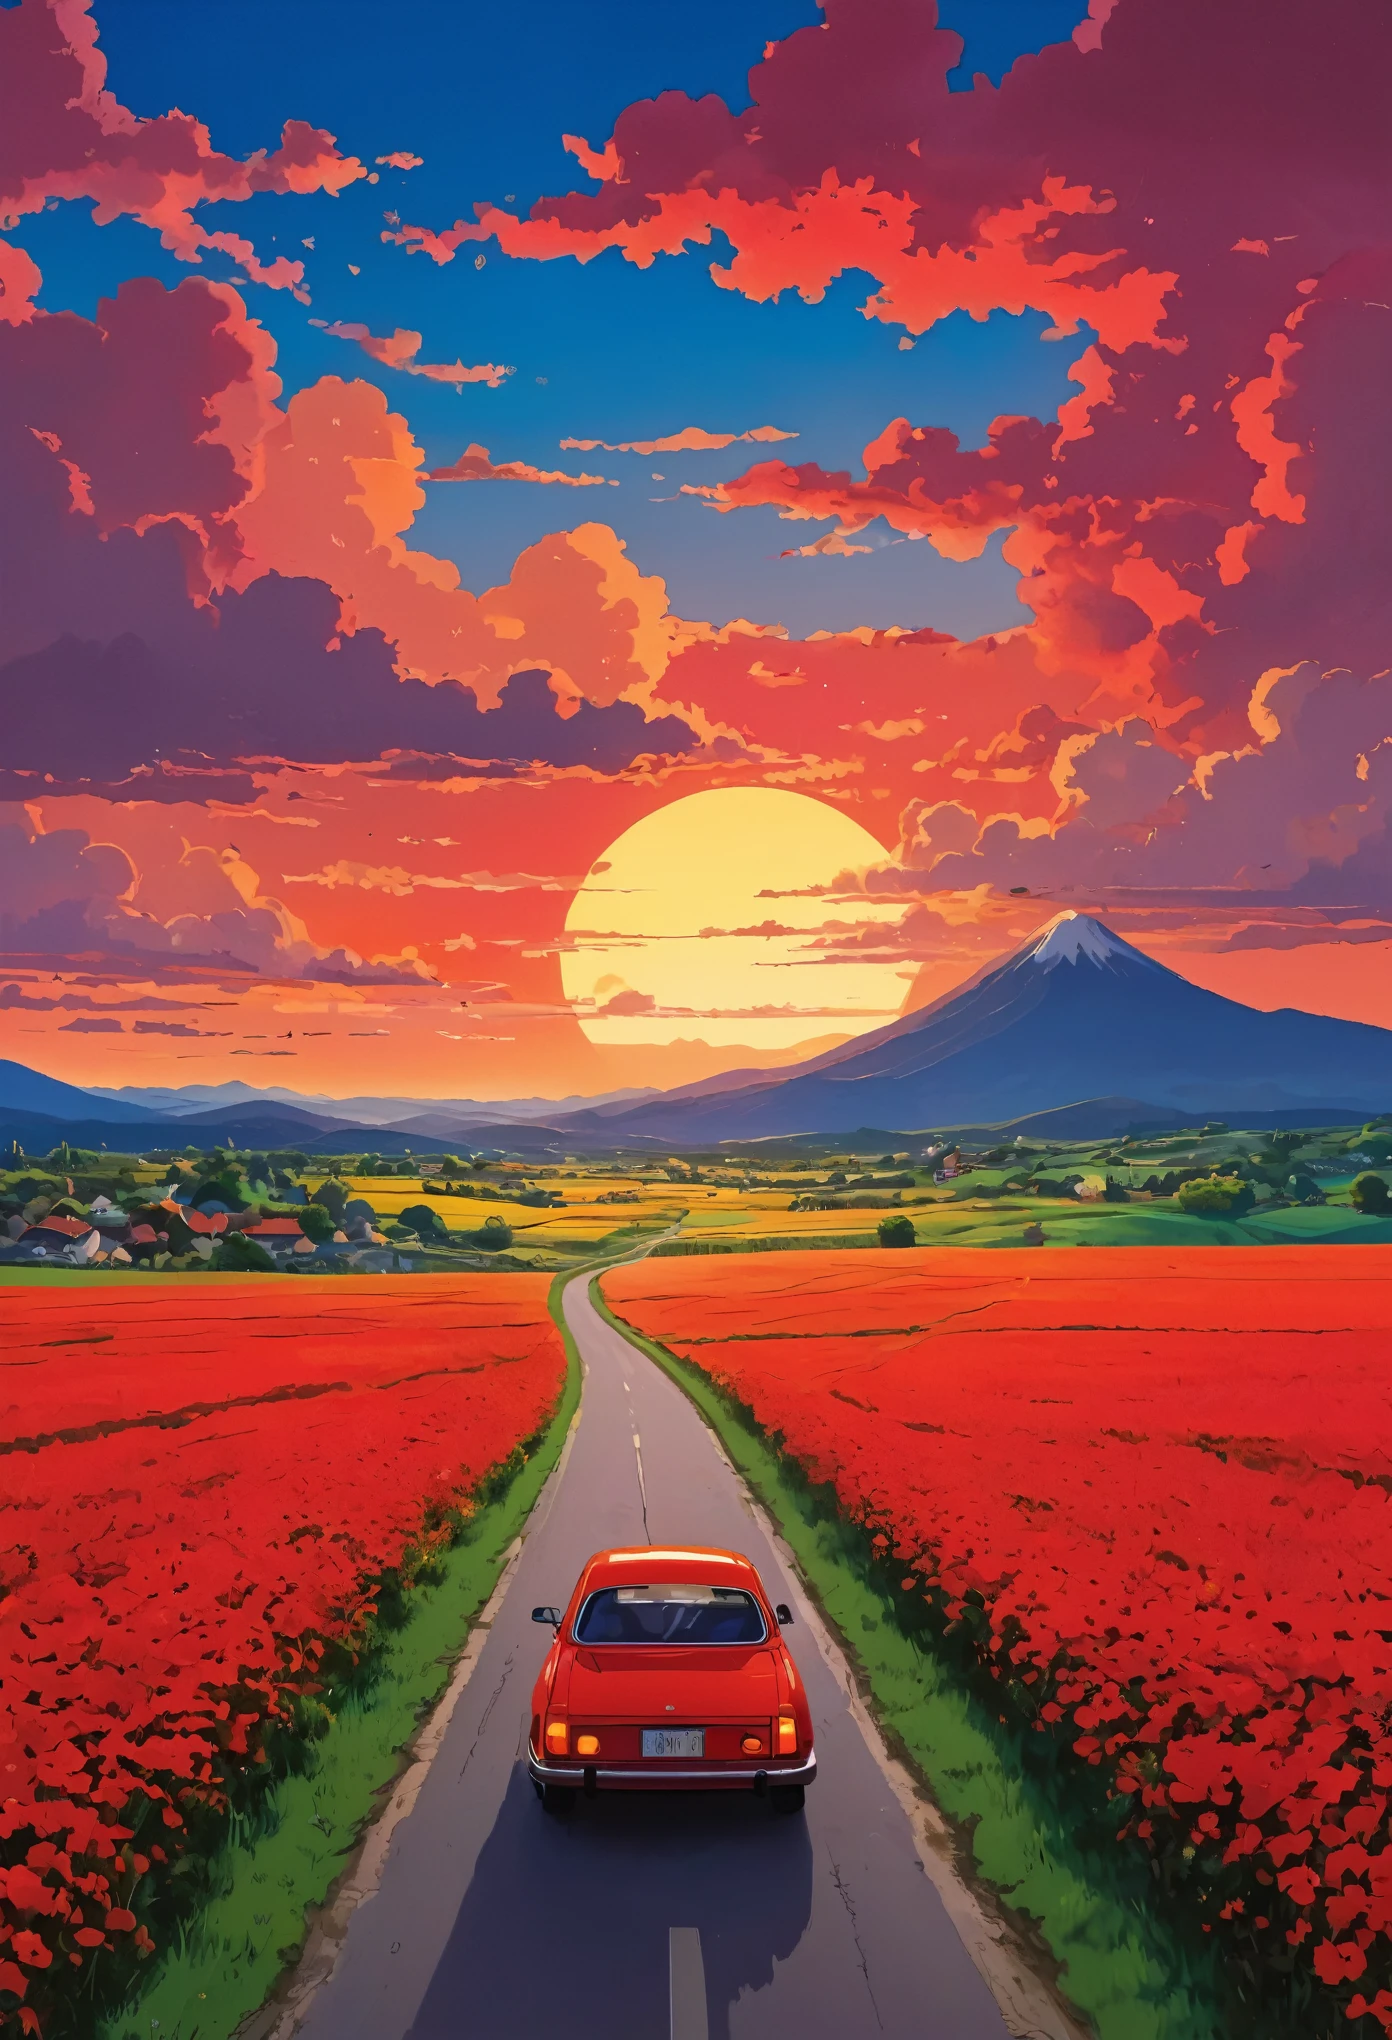 (Minimalism:1.4), There is a red car on the road, Studio Ghibli Art, Miyazaki, Pasture with red sky and red clouds, sunset view, road filled with flowers, vibrant colours 